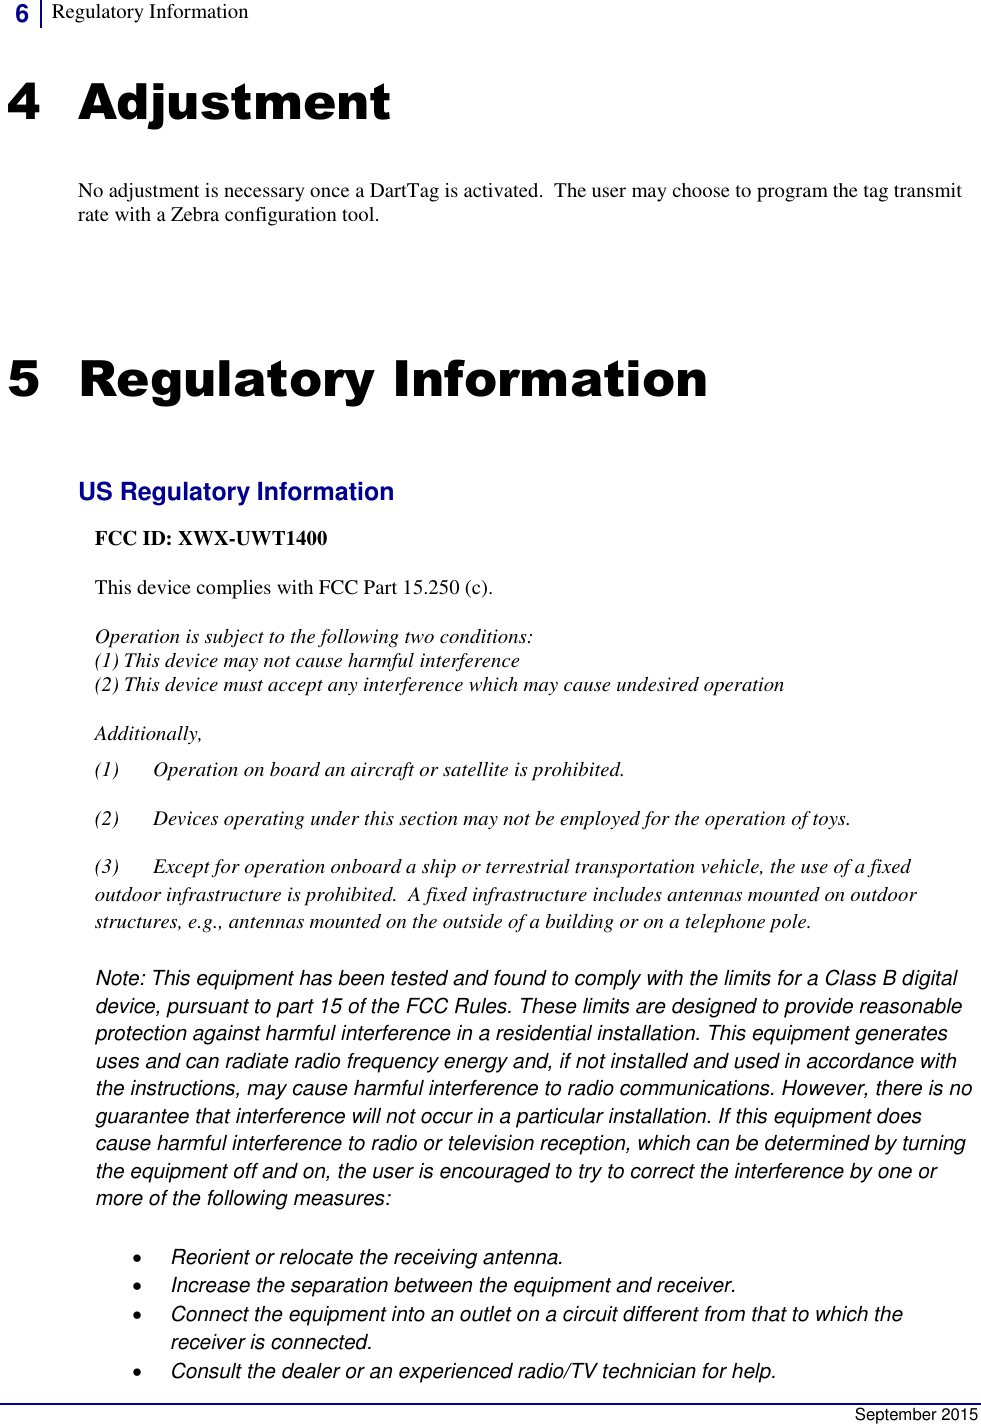 6 Regulatory Information      September 2015 4 Adjustment No adjustment is necessary once a DartTag is activated.  The user may choose to program the tag transmit rate with a Zebra configuration tool. 5 Regulatory Information US Regulatory Information FCC ID: XWX-UWT1400 This device complies with FCC Part 15.250 (c).  Operation is subject to the following two conditions:  (1) This device may not cause harmful interference  (2) This device must accept any interference which may cause undesired operation Additionally,  (1) Operation on board an aircraft or satellite is prohibited. (2) Devices operating under this section may not be employed for the operation of toys. (3) Except for operation onboard a ship or terrestrial transportation vehicle, the use of a fixed outdoor infrastructure is prohibited.  A fixed infrastructure includes antennas mounted on outdoor structures, e.g., antennas mounted on the outside of a building or on a telephone pole. Note: This equipment has been tested and found to comply with the limits for a Class B digital device, pursuant to part 15 of the FCC Rules. These limits are designed to provide reasonable protection against harmful interference in a residential installation. This equipment generates uses and can radiate radio frequency energy and, if not installed and used in accordance with the instructions, may cause harmful interference to radio communications. However, there is no guarantee that interference will not occur in a particular installation. If this equipment does cause harmful interference to radio or television reception, which can be determined by turning the equipment off and on, the user is encouraged to try to correct the interference by one or more of the following measures:  Reorient or relocate the receiving antenna.  Increase the separation between the equipment and receiver.  Connect the equipment into an outlet on a circuit different from that to which the receiver is connected.  Consult the dealer or an experienced radio/TV technician for help. 